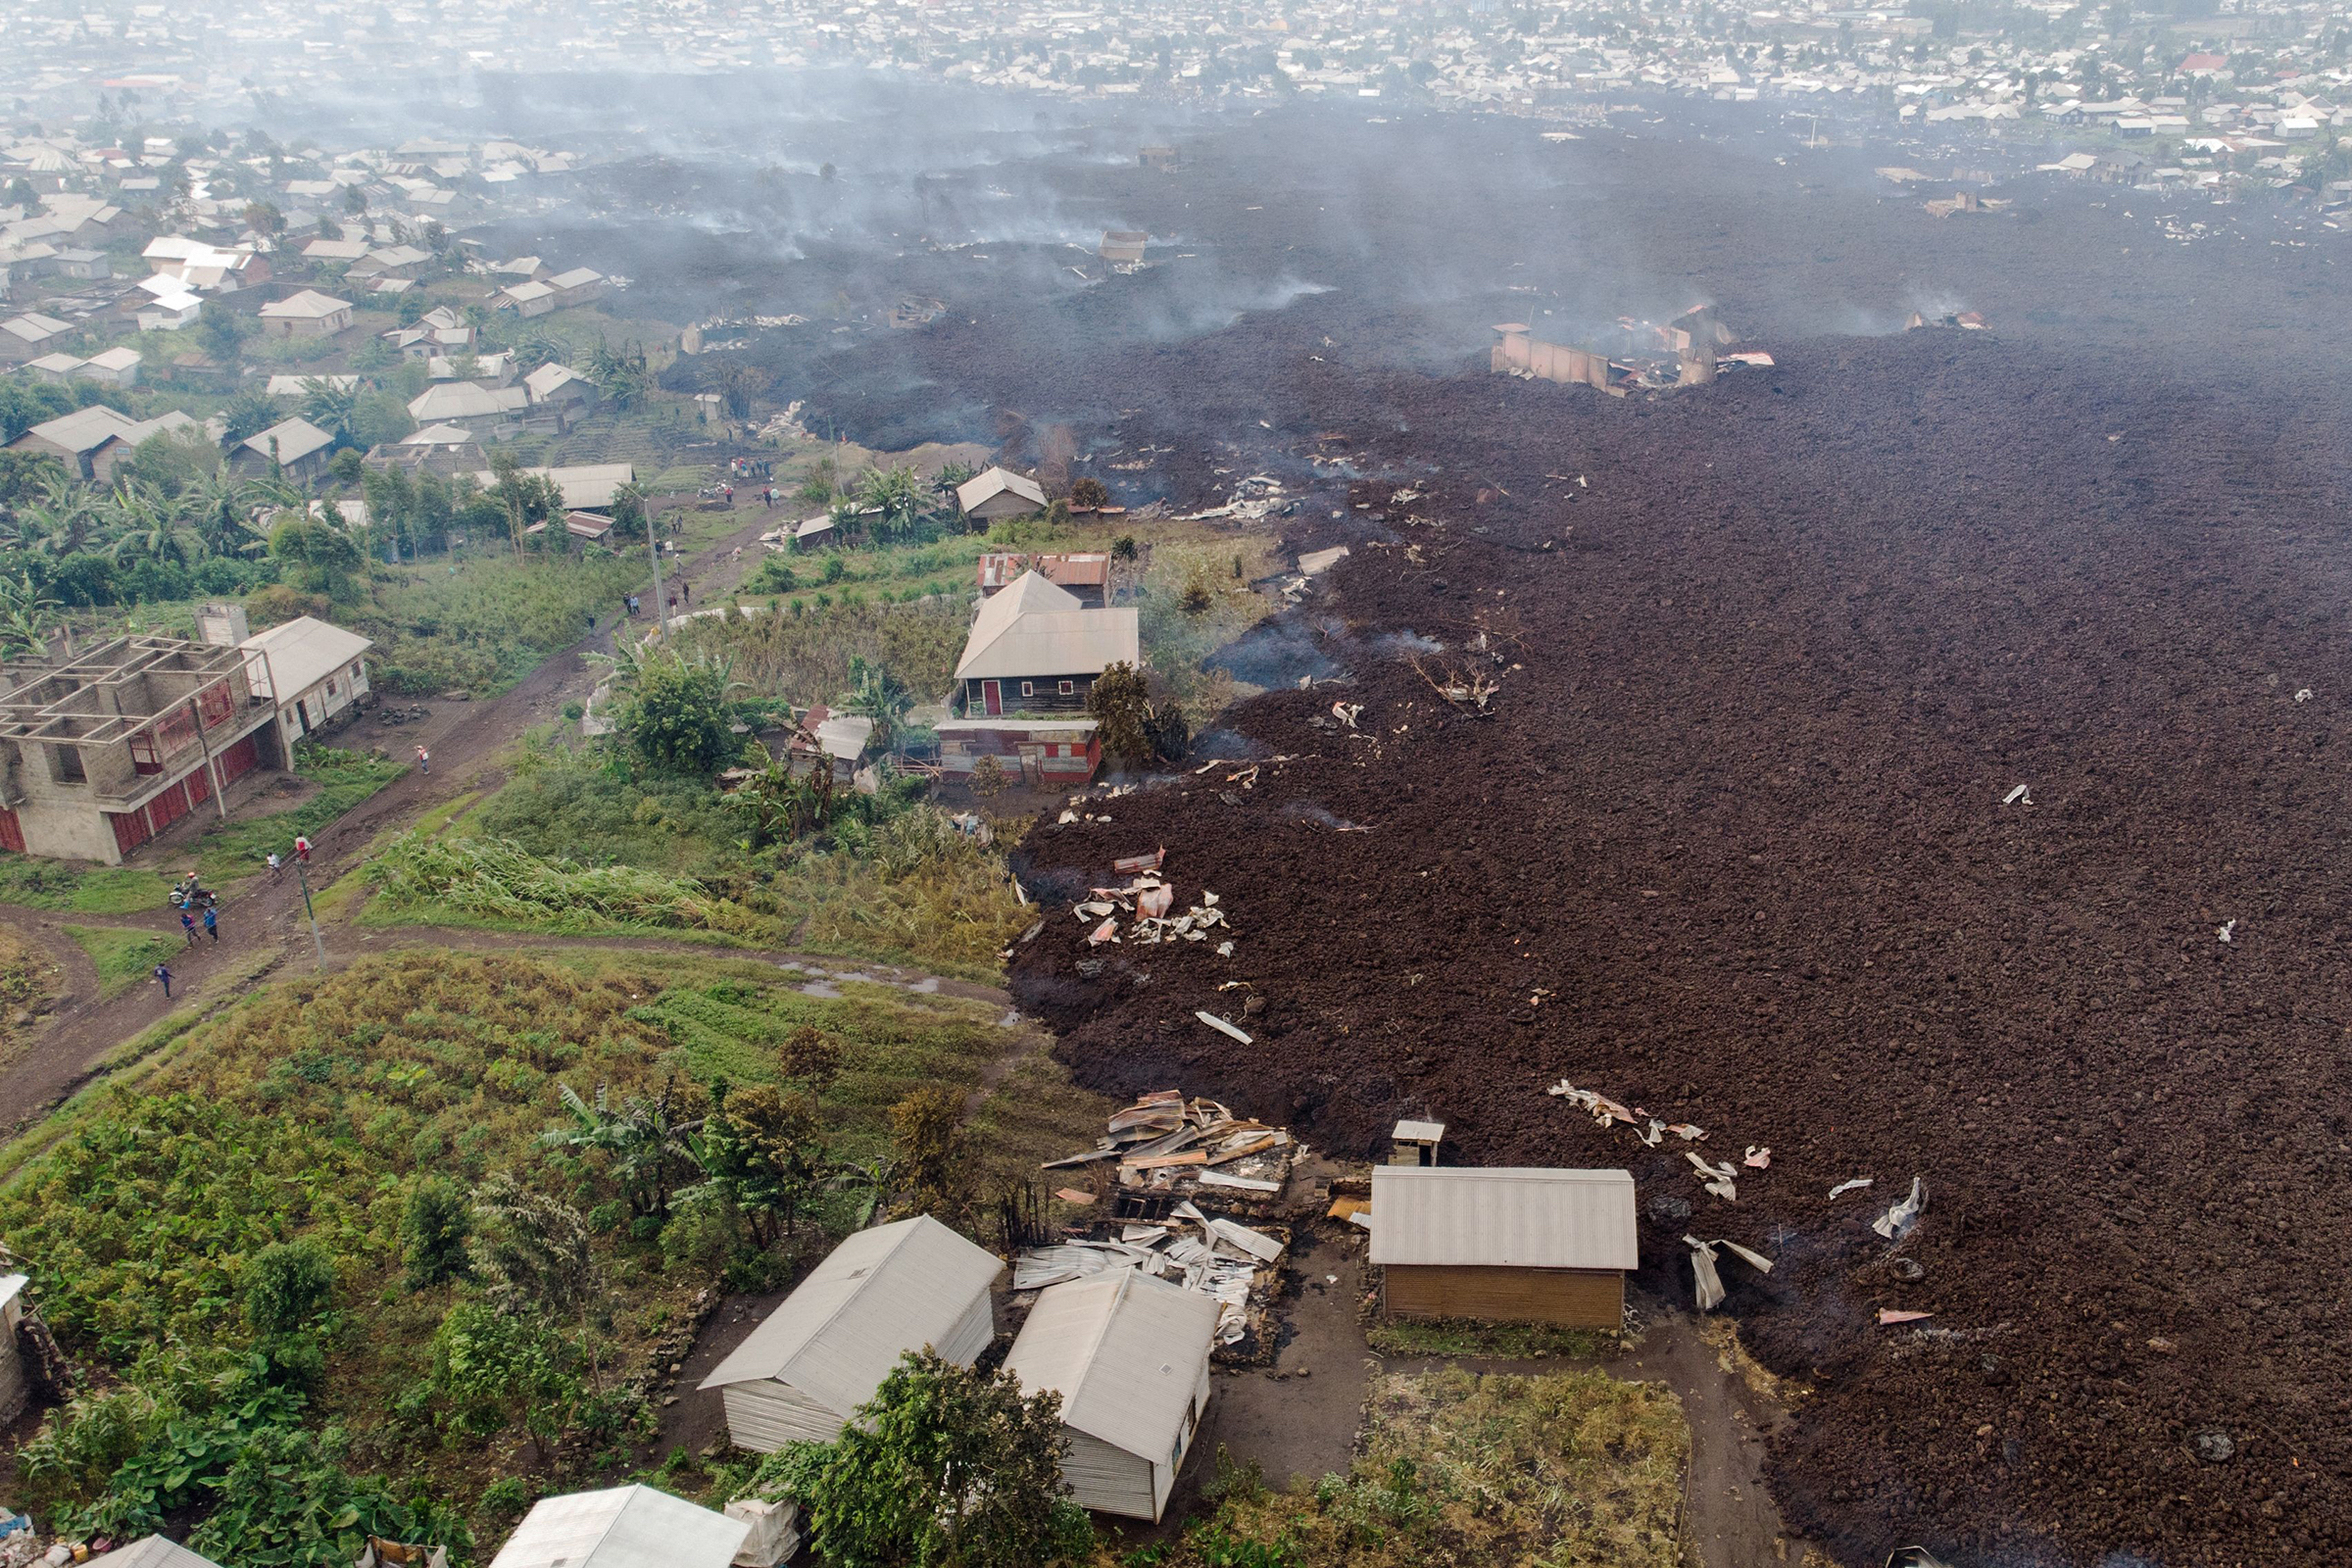 An aerial view shows debris engulfing buildings in Bushara village, near Goma, on May 23, after a volcanic eruption of Mount Nyiragongo that sent thousands of residents fleeing during the night in eastern Democratic Republic of Congo. The river of boiling lava came to a halt outside the city of Goma. (Justin Katumwa—AFP/Getty Images)